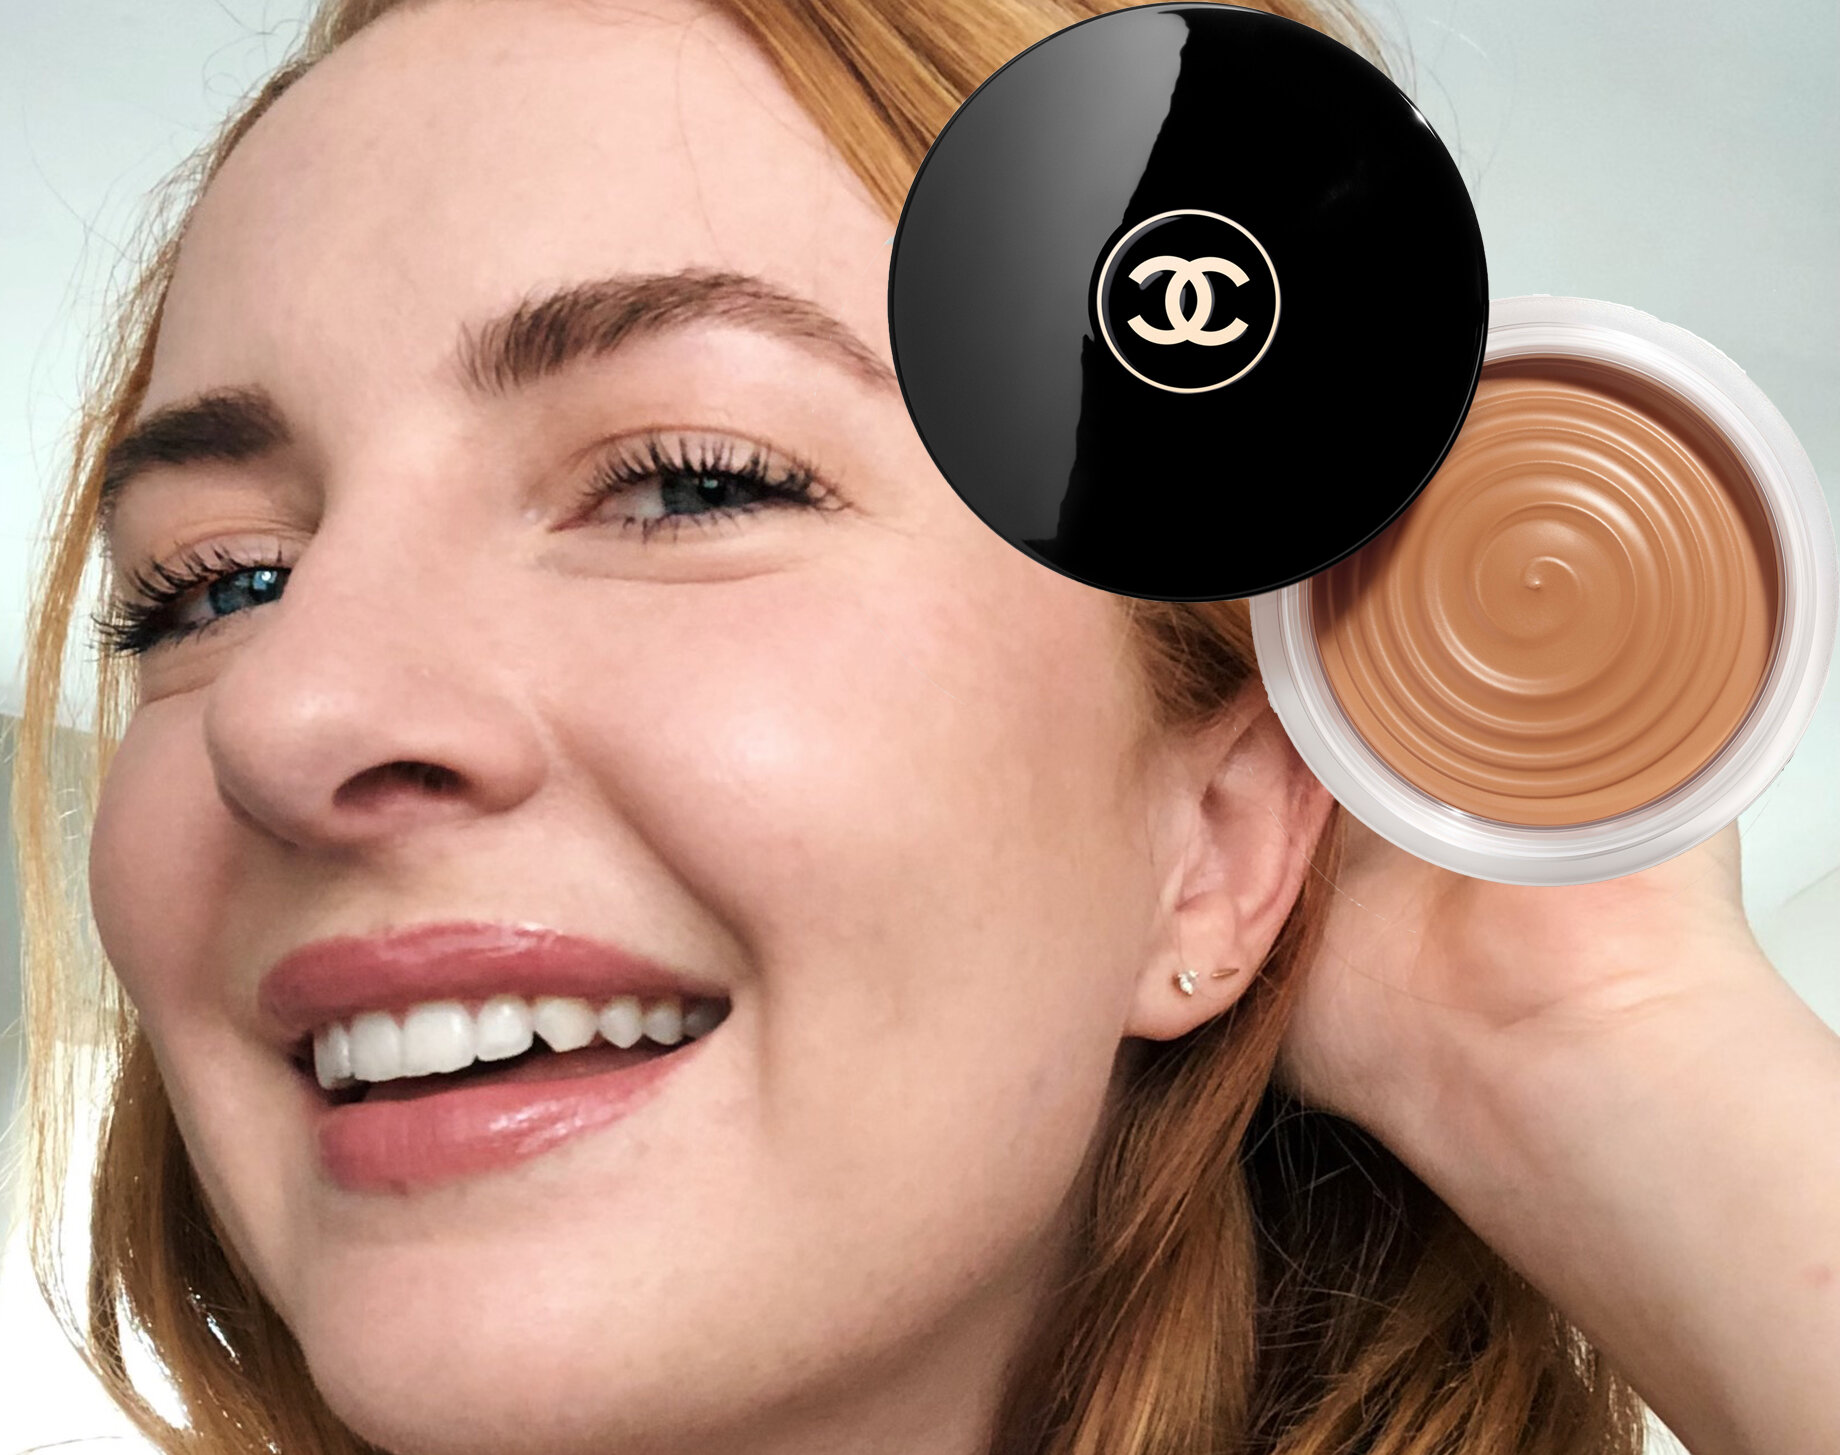 Honest review of the Chanel LES BEIGES Healthy Glow Bronzing Cream! Wh, chanel  bronzer